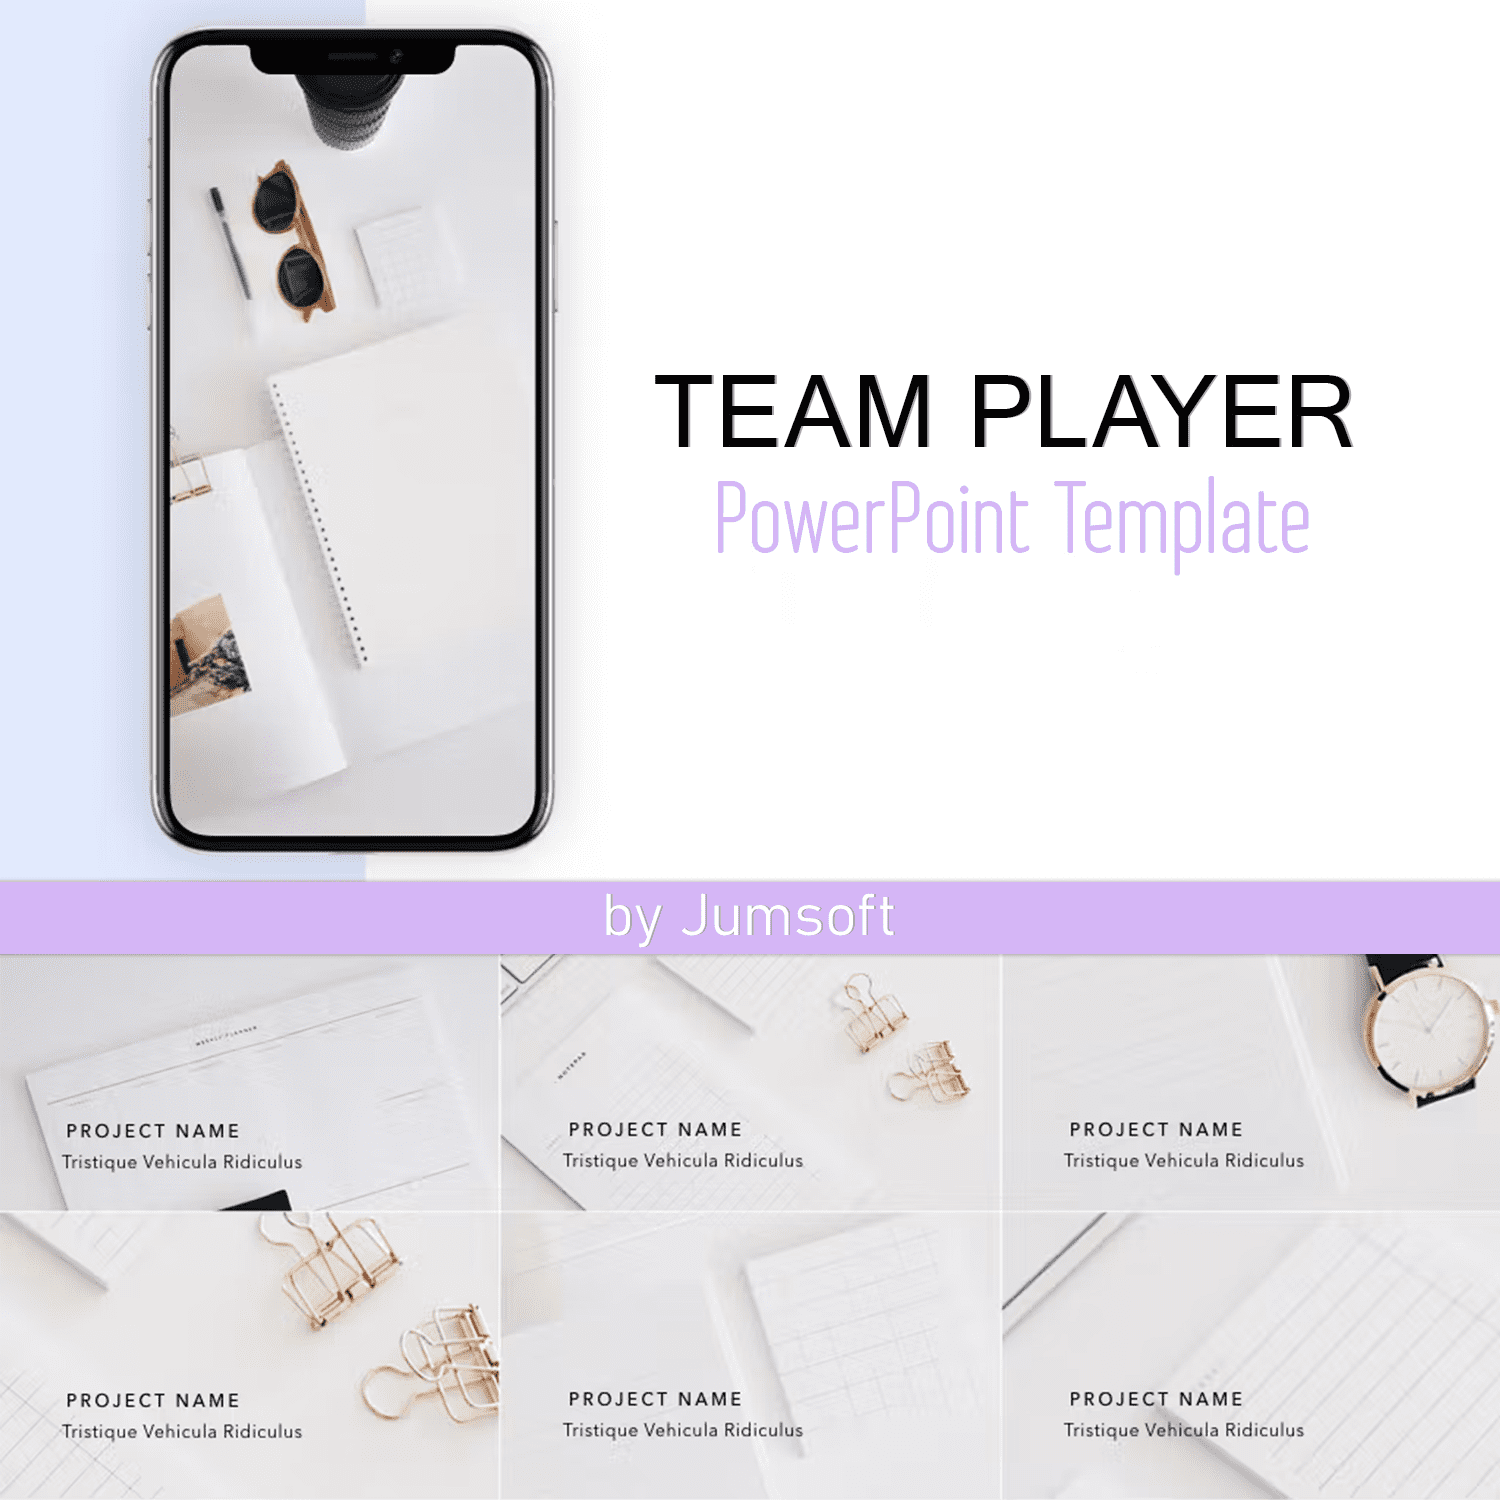 Collection of images of unique presentation template slides on the theme of a team player.